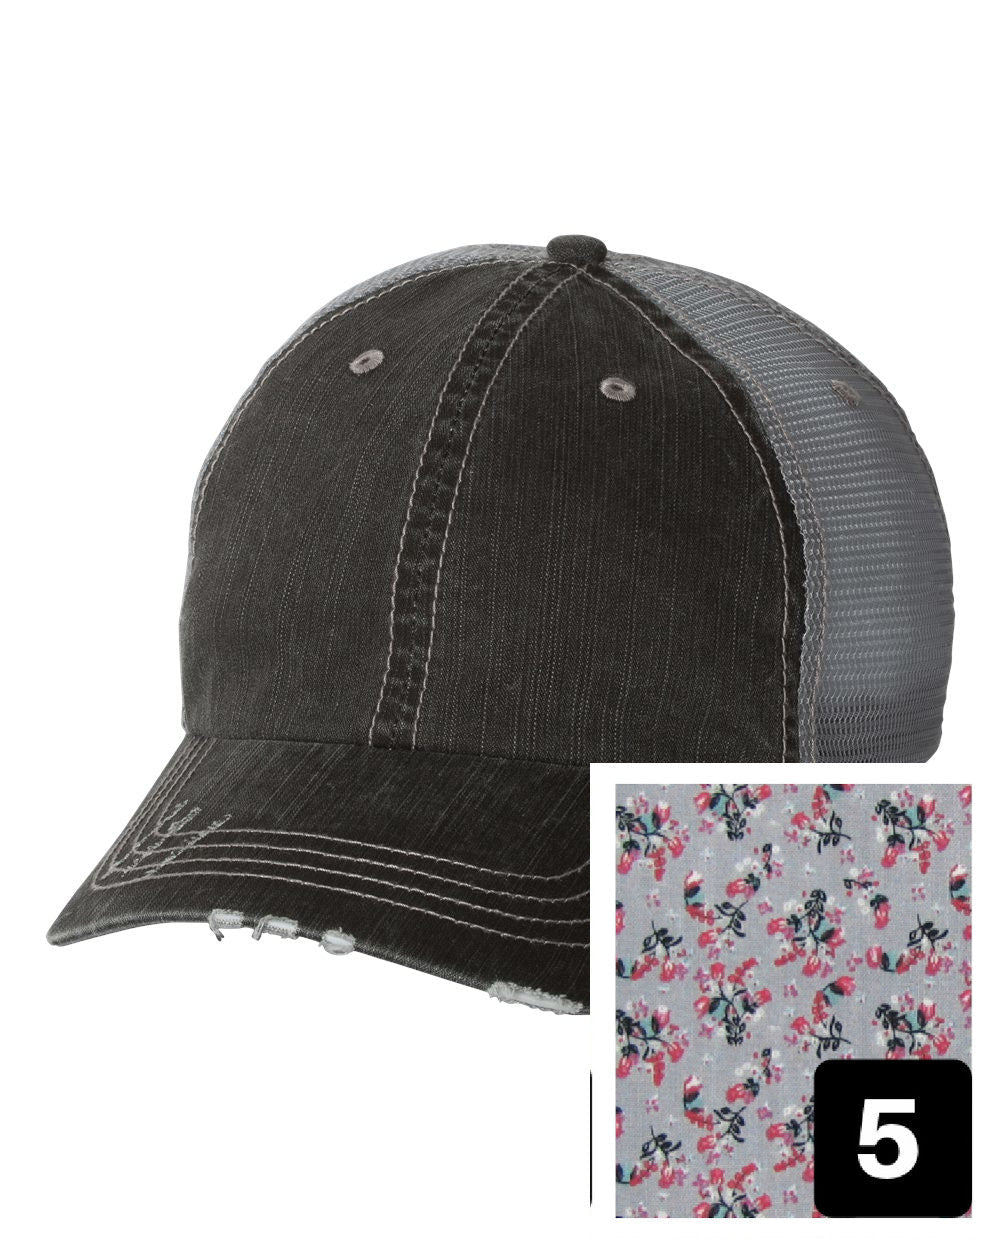 gray distressed trucker hat with purple and pink floral fabric state of Indiana